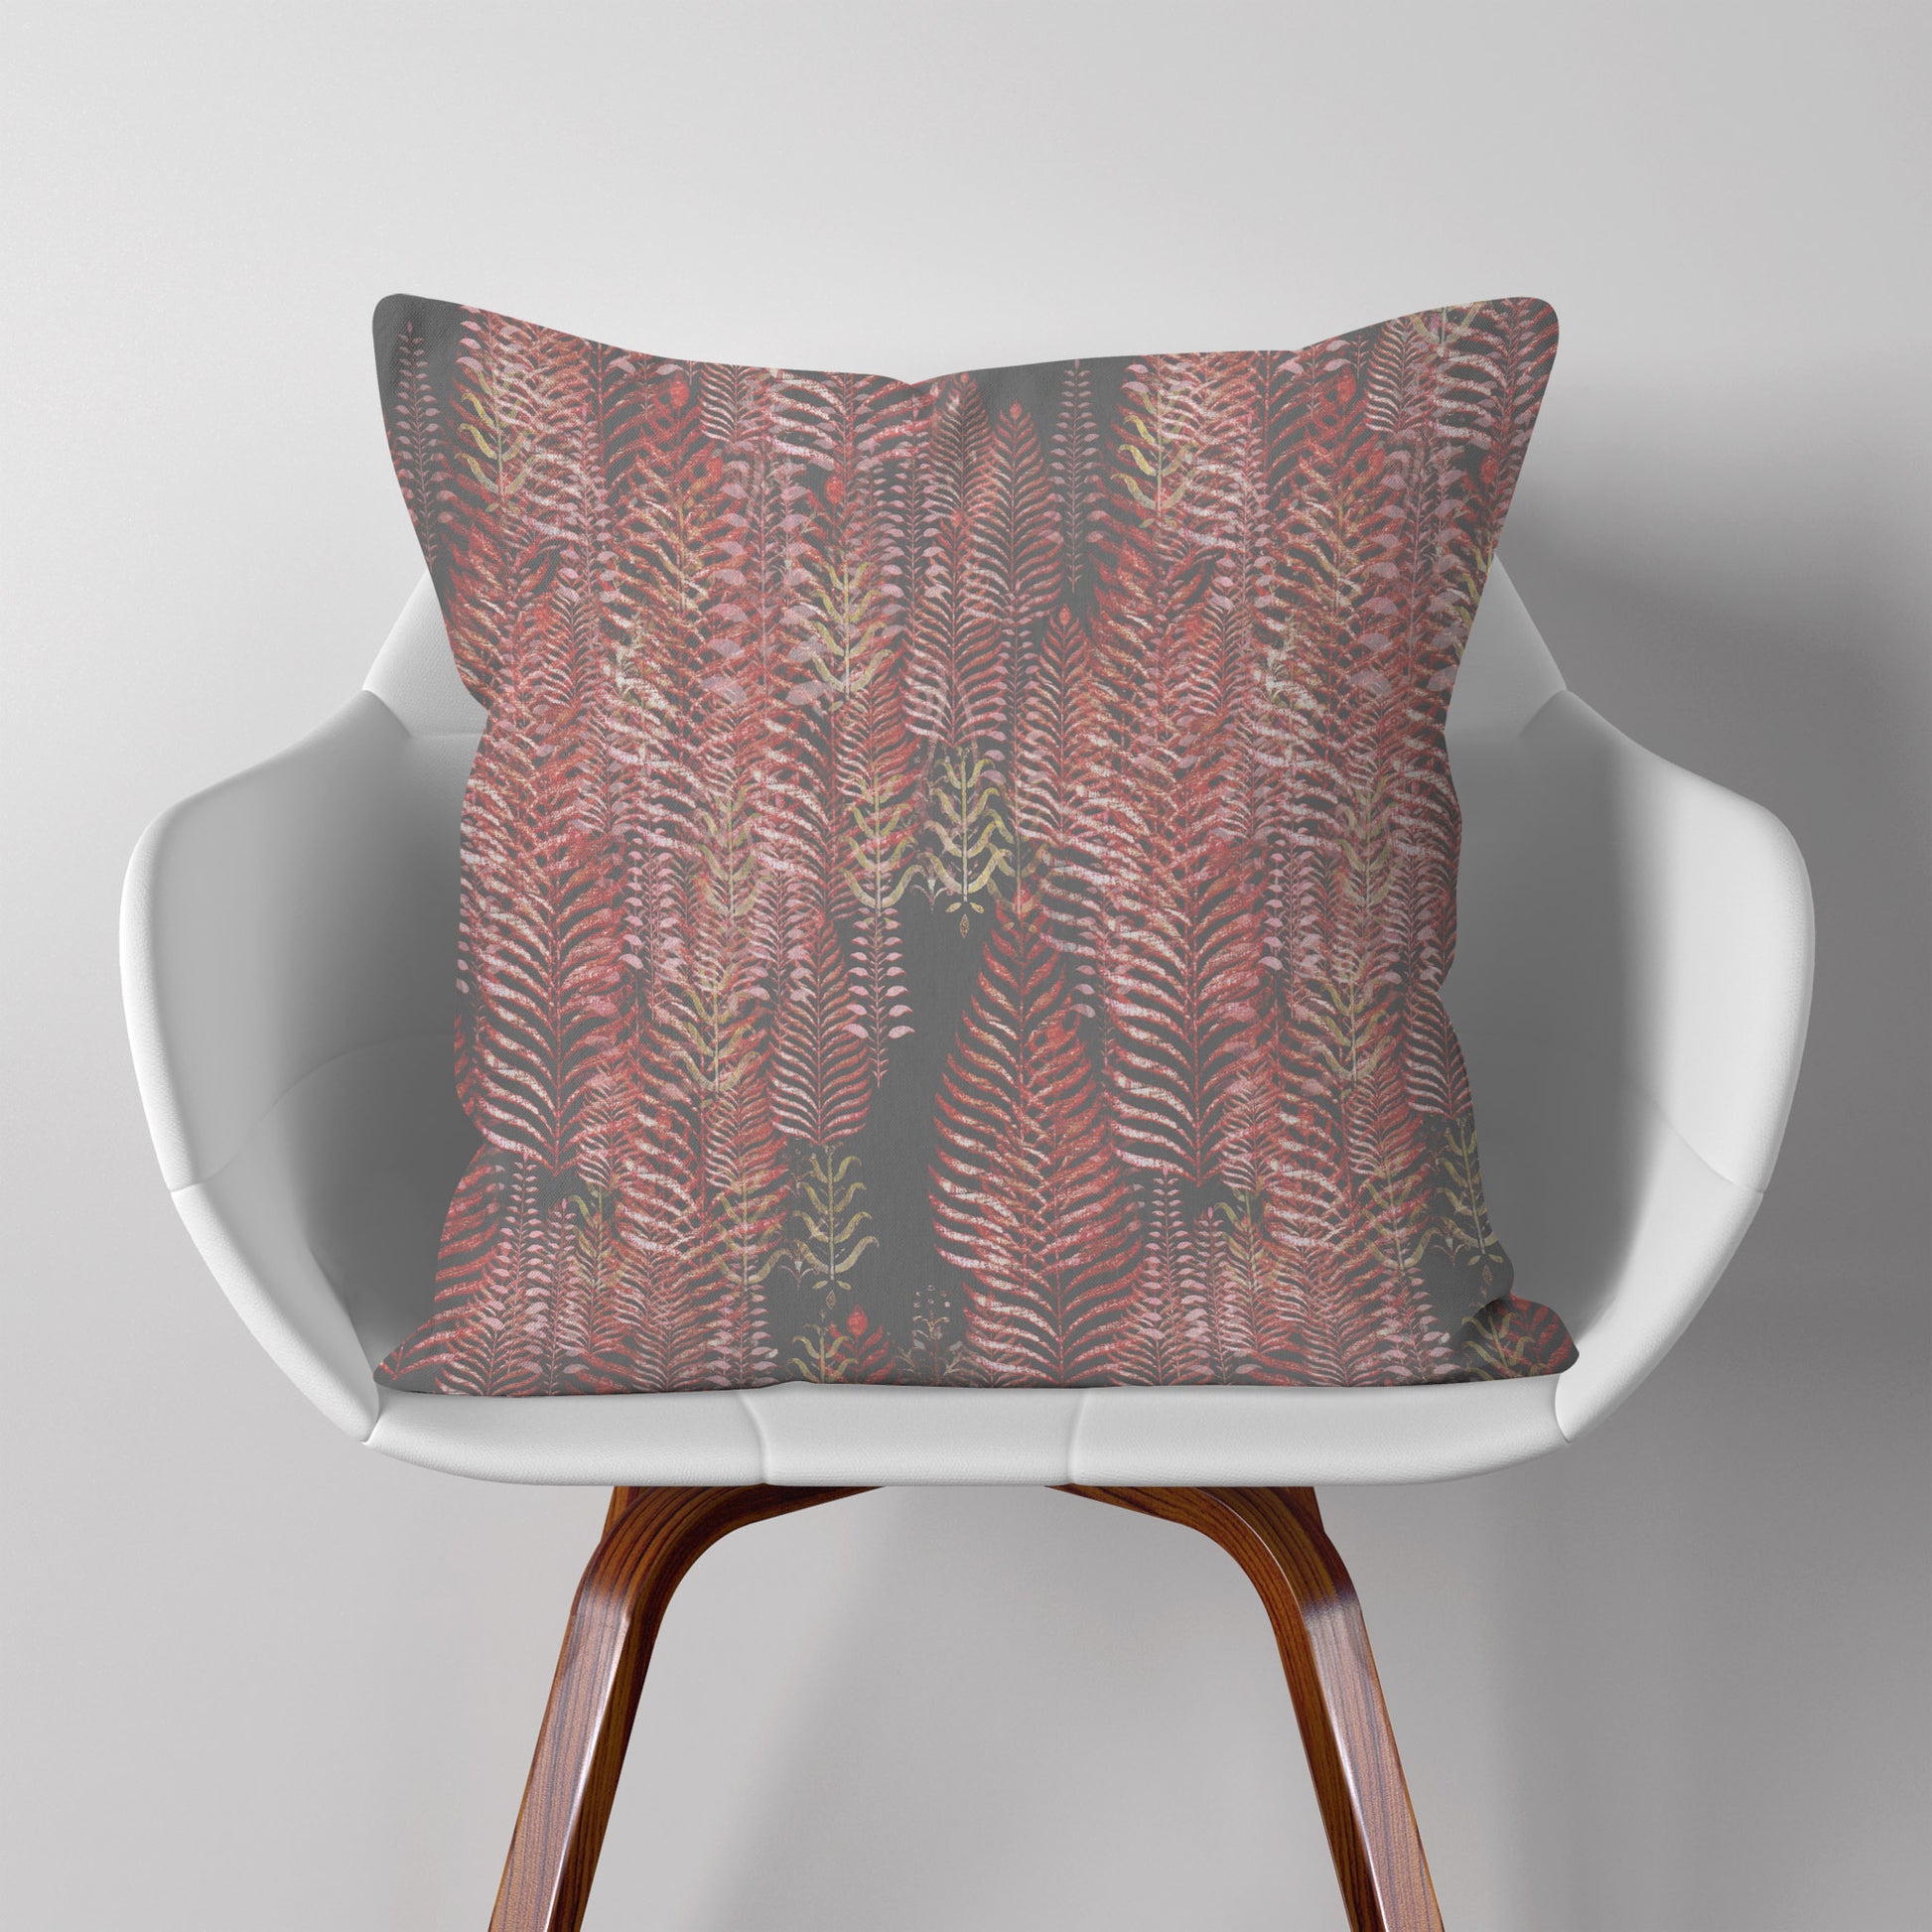 Square throw pillow featuring a block print tree pattern in pink and gray tones, sitting on a modern white chair.